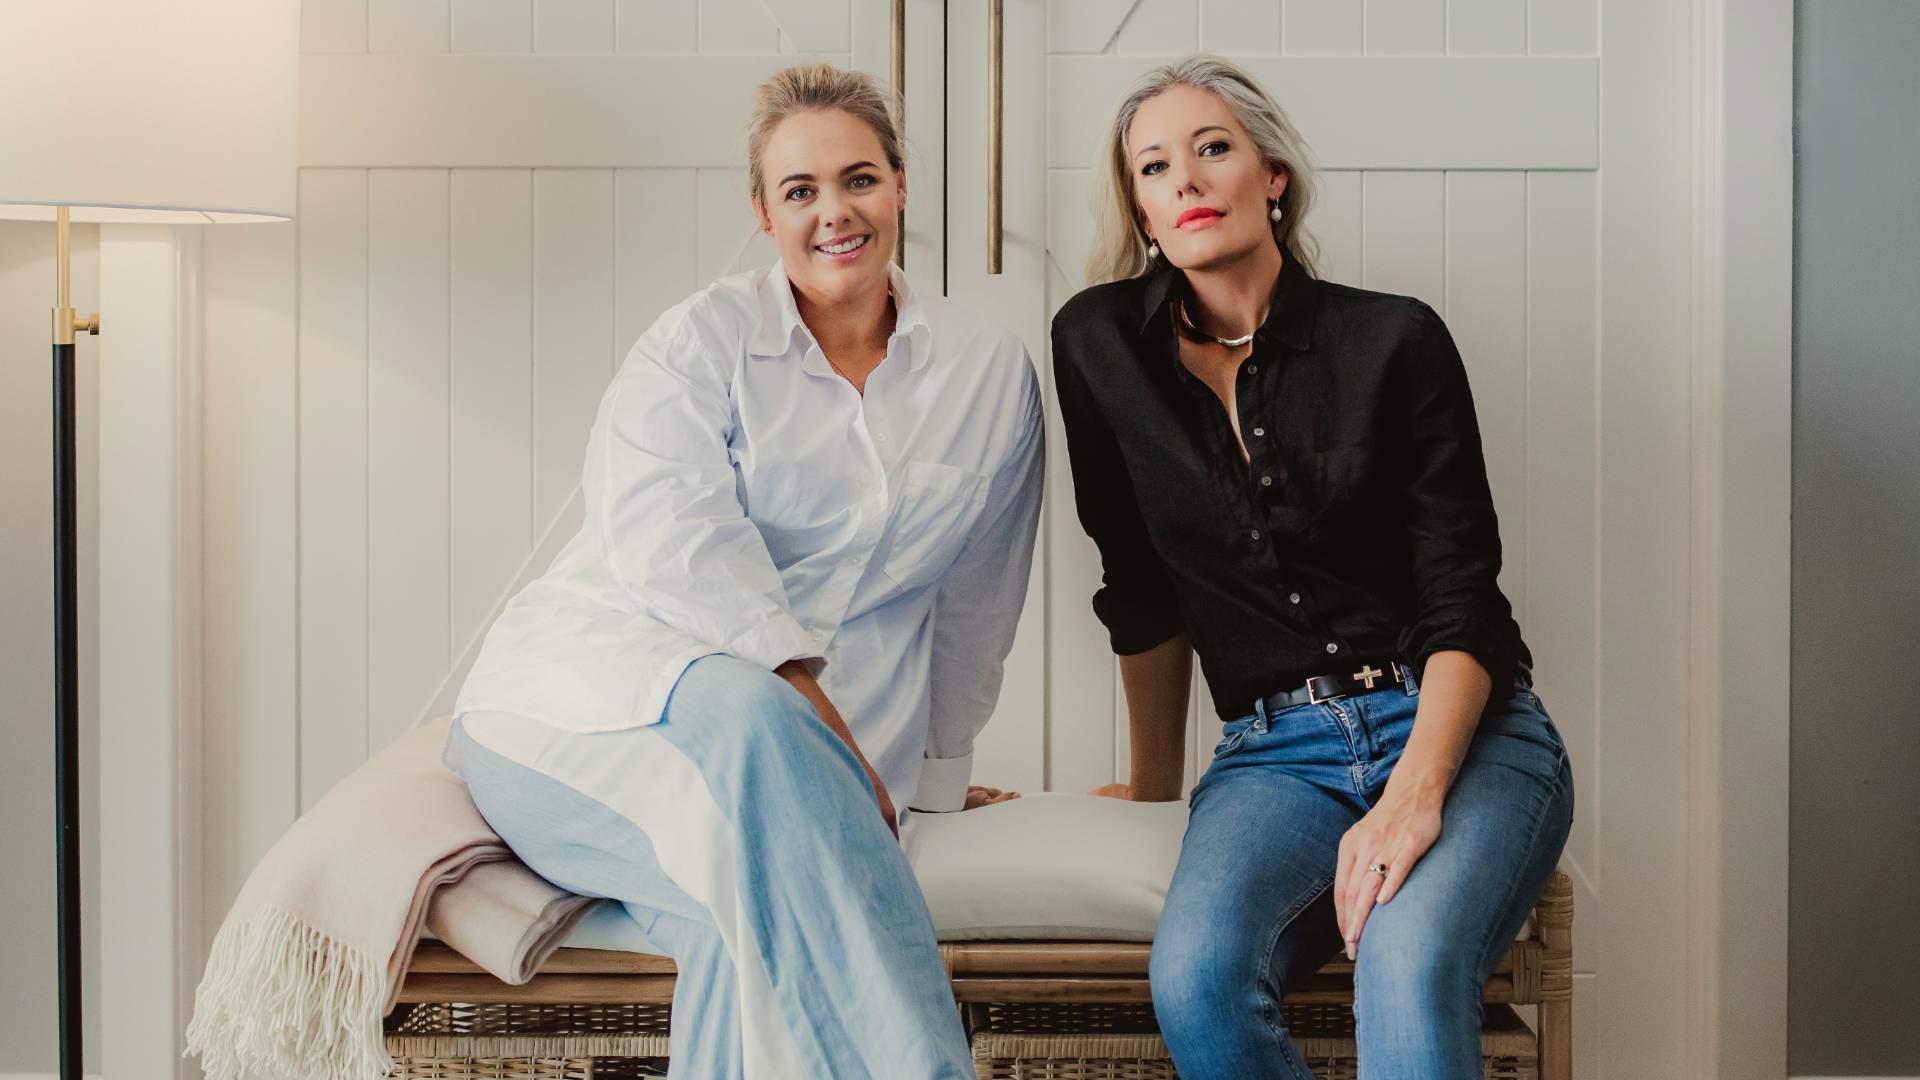 These Matakana Sisters Have Launched a Luxe Personalised Gifting Service Championing Local Brands